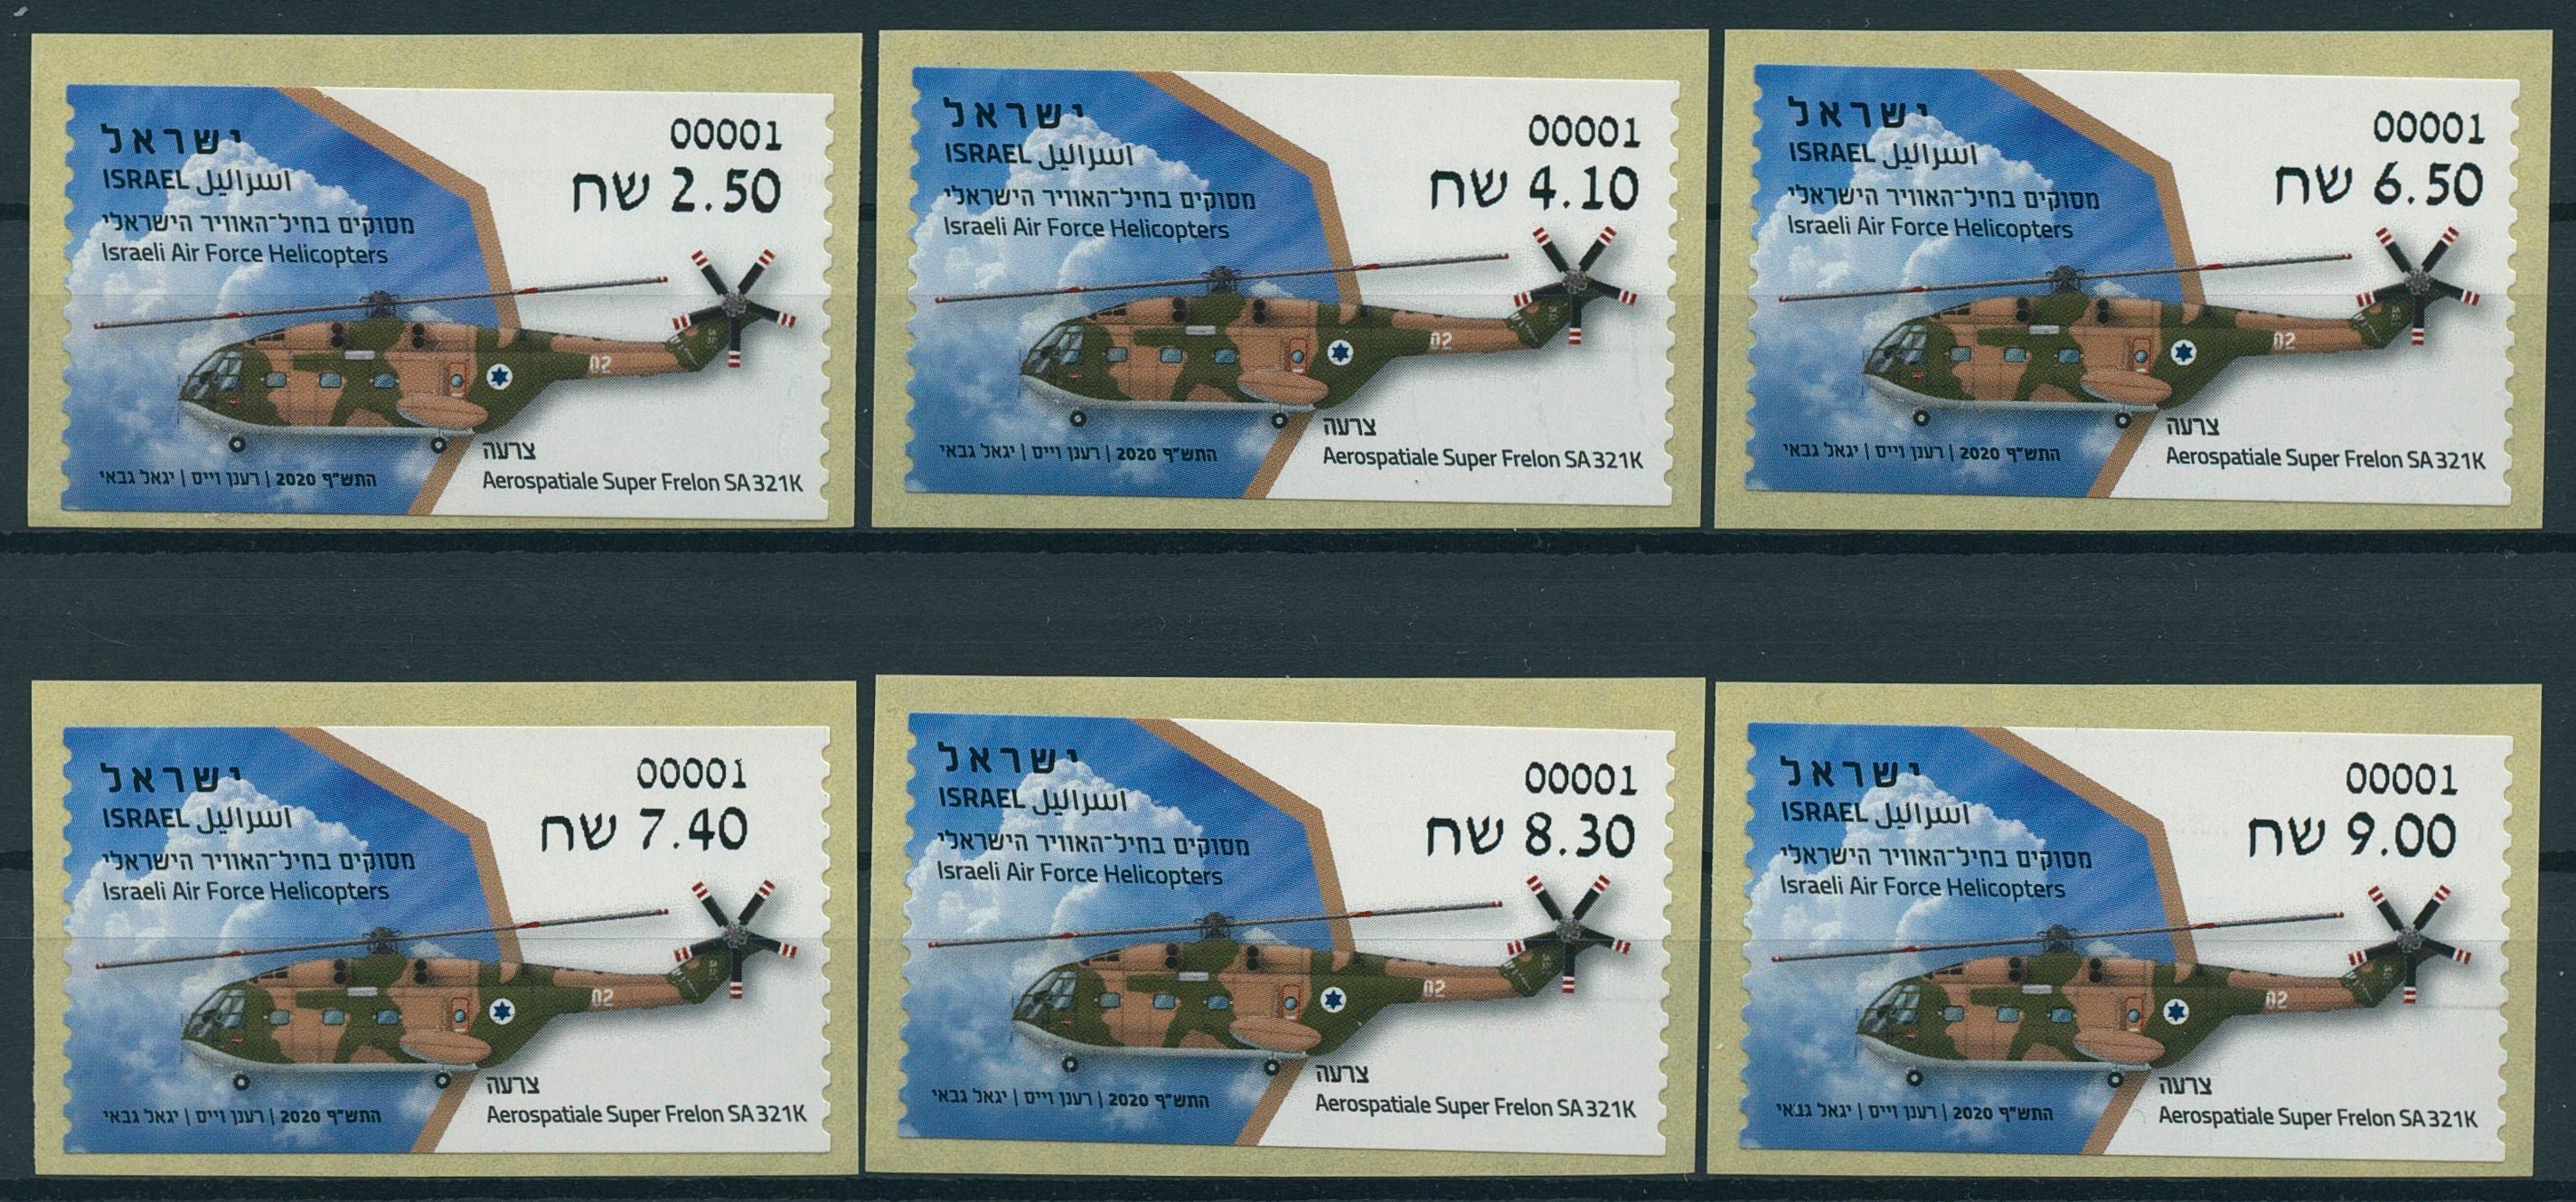 Israel Military Aviation Stamps 2020 MNH Helicopters Aerospatiale 6v ATM Set